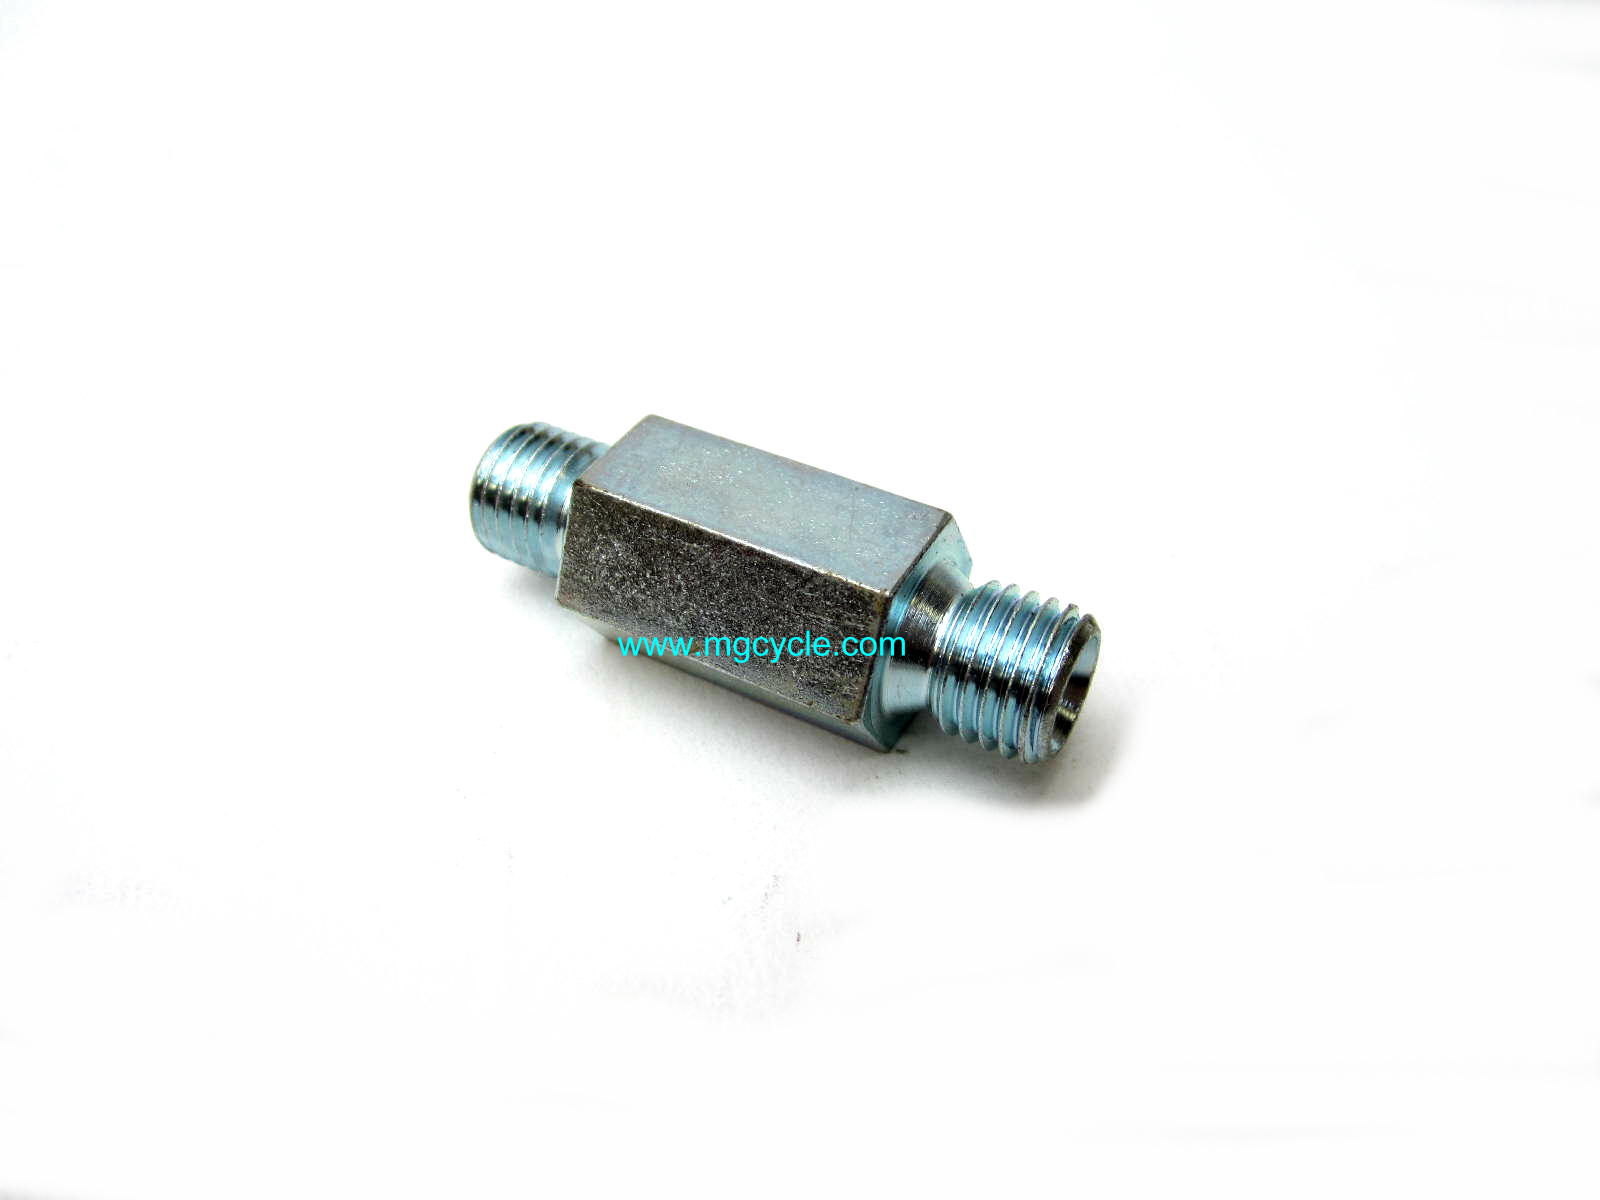 Oil delivery hose fitting to cylinder head, square fin engines